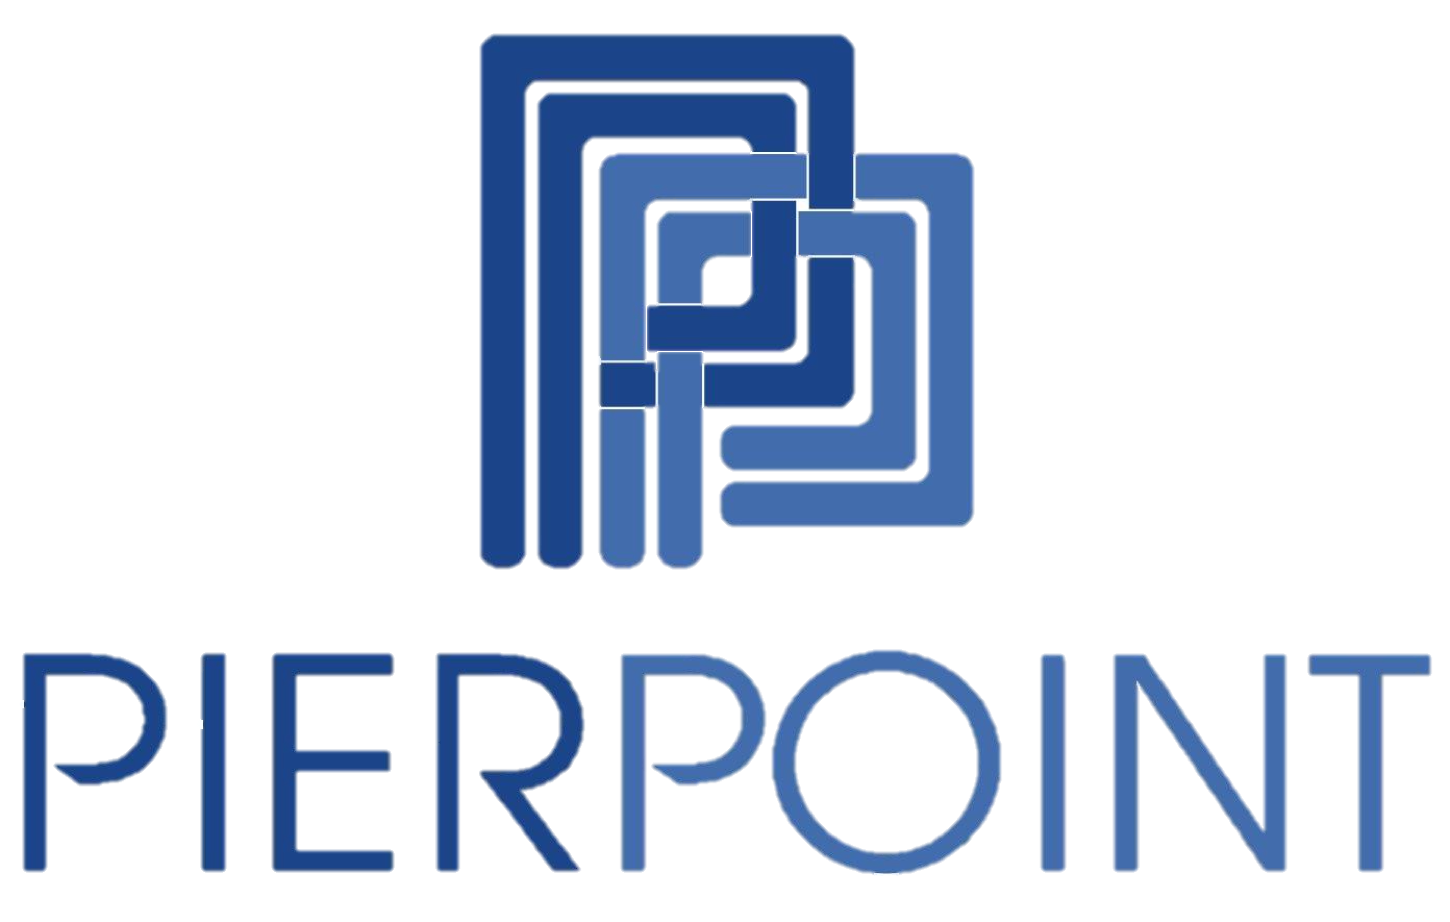 PierPoint USA is a boutique company specializing in Textiles, Area Rugs and Unique Accessories. Formed to utilized our unique craftsmanship, as well as our industry partnerships to service the hospitality, multifamily, senior living and commercial industries.